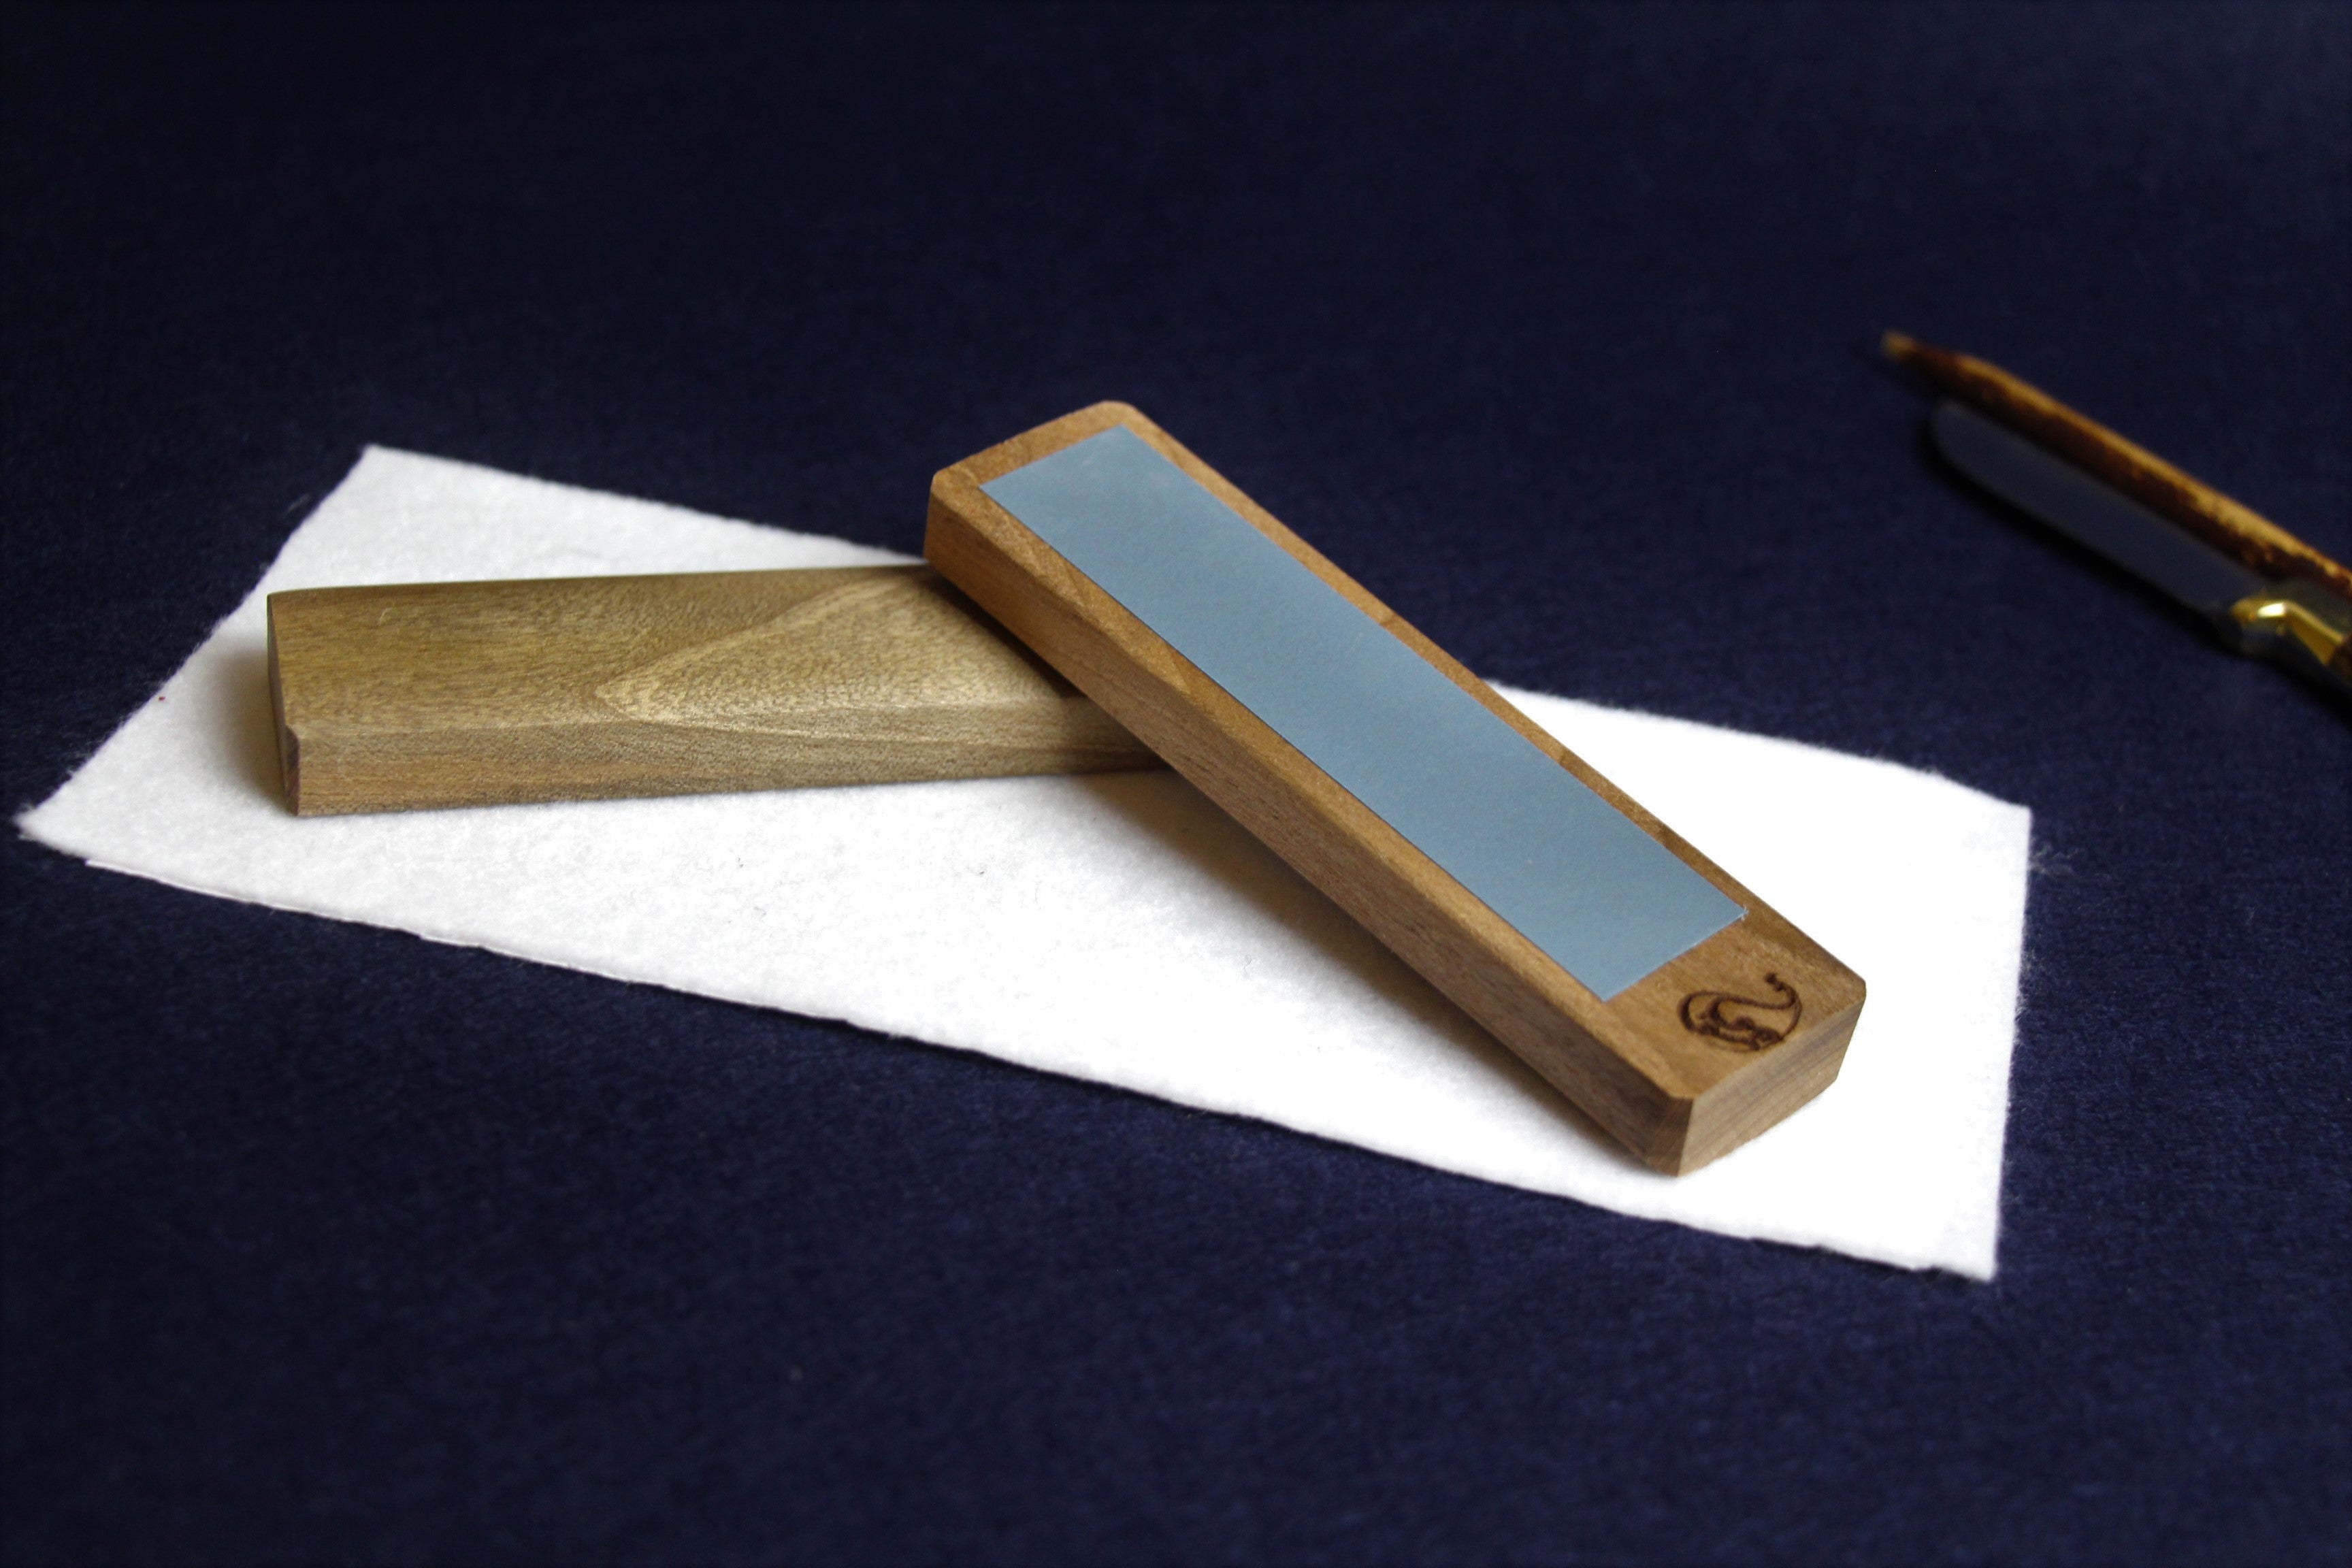 Rectangular walnut wood makta with sanding paper for cutting pens for Arabic calligraphy